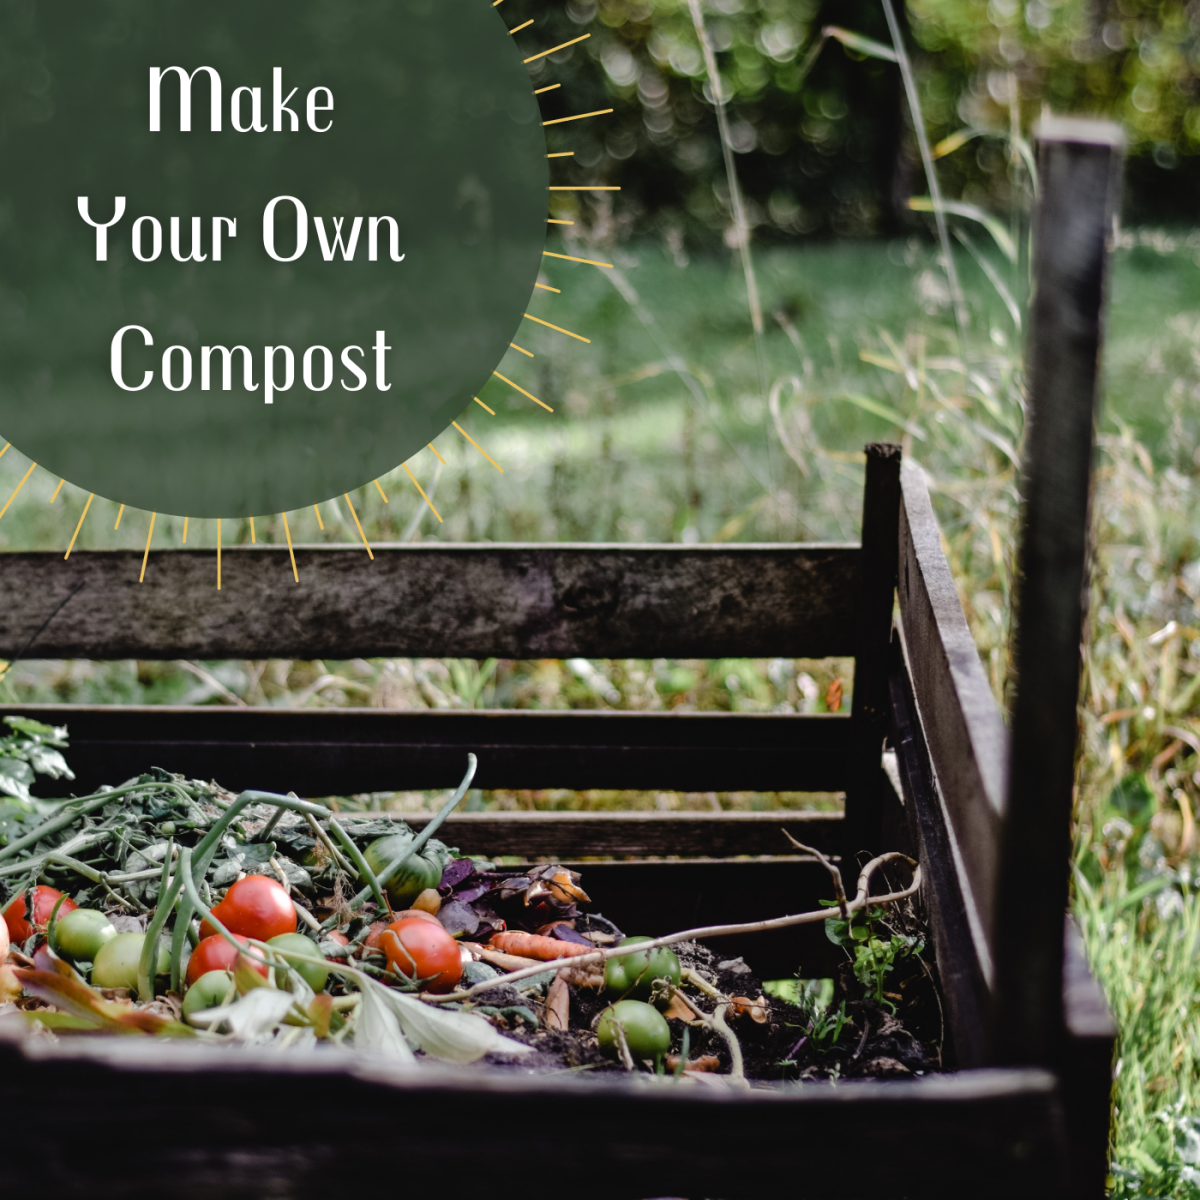 How to Make Your Own Compost and Compost Bin